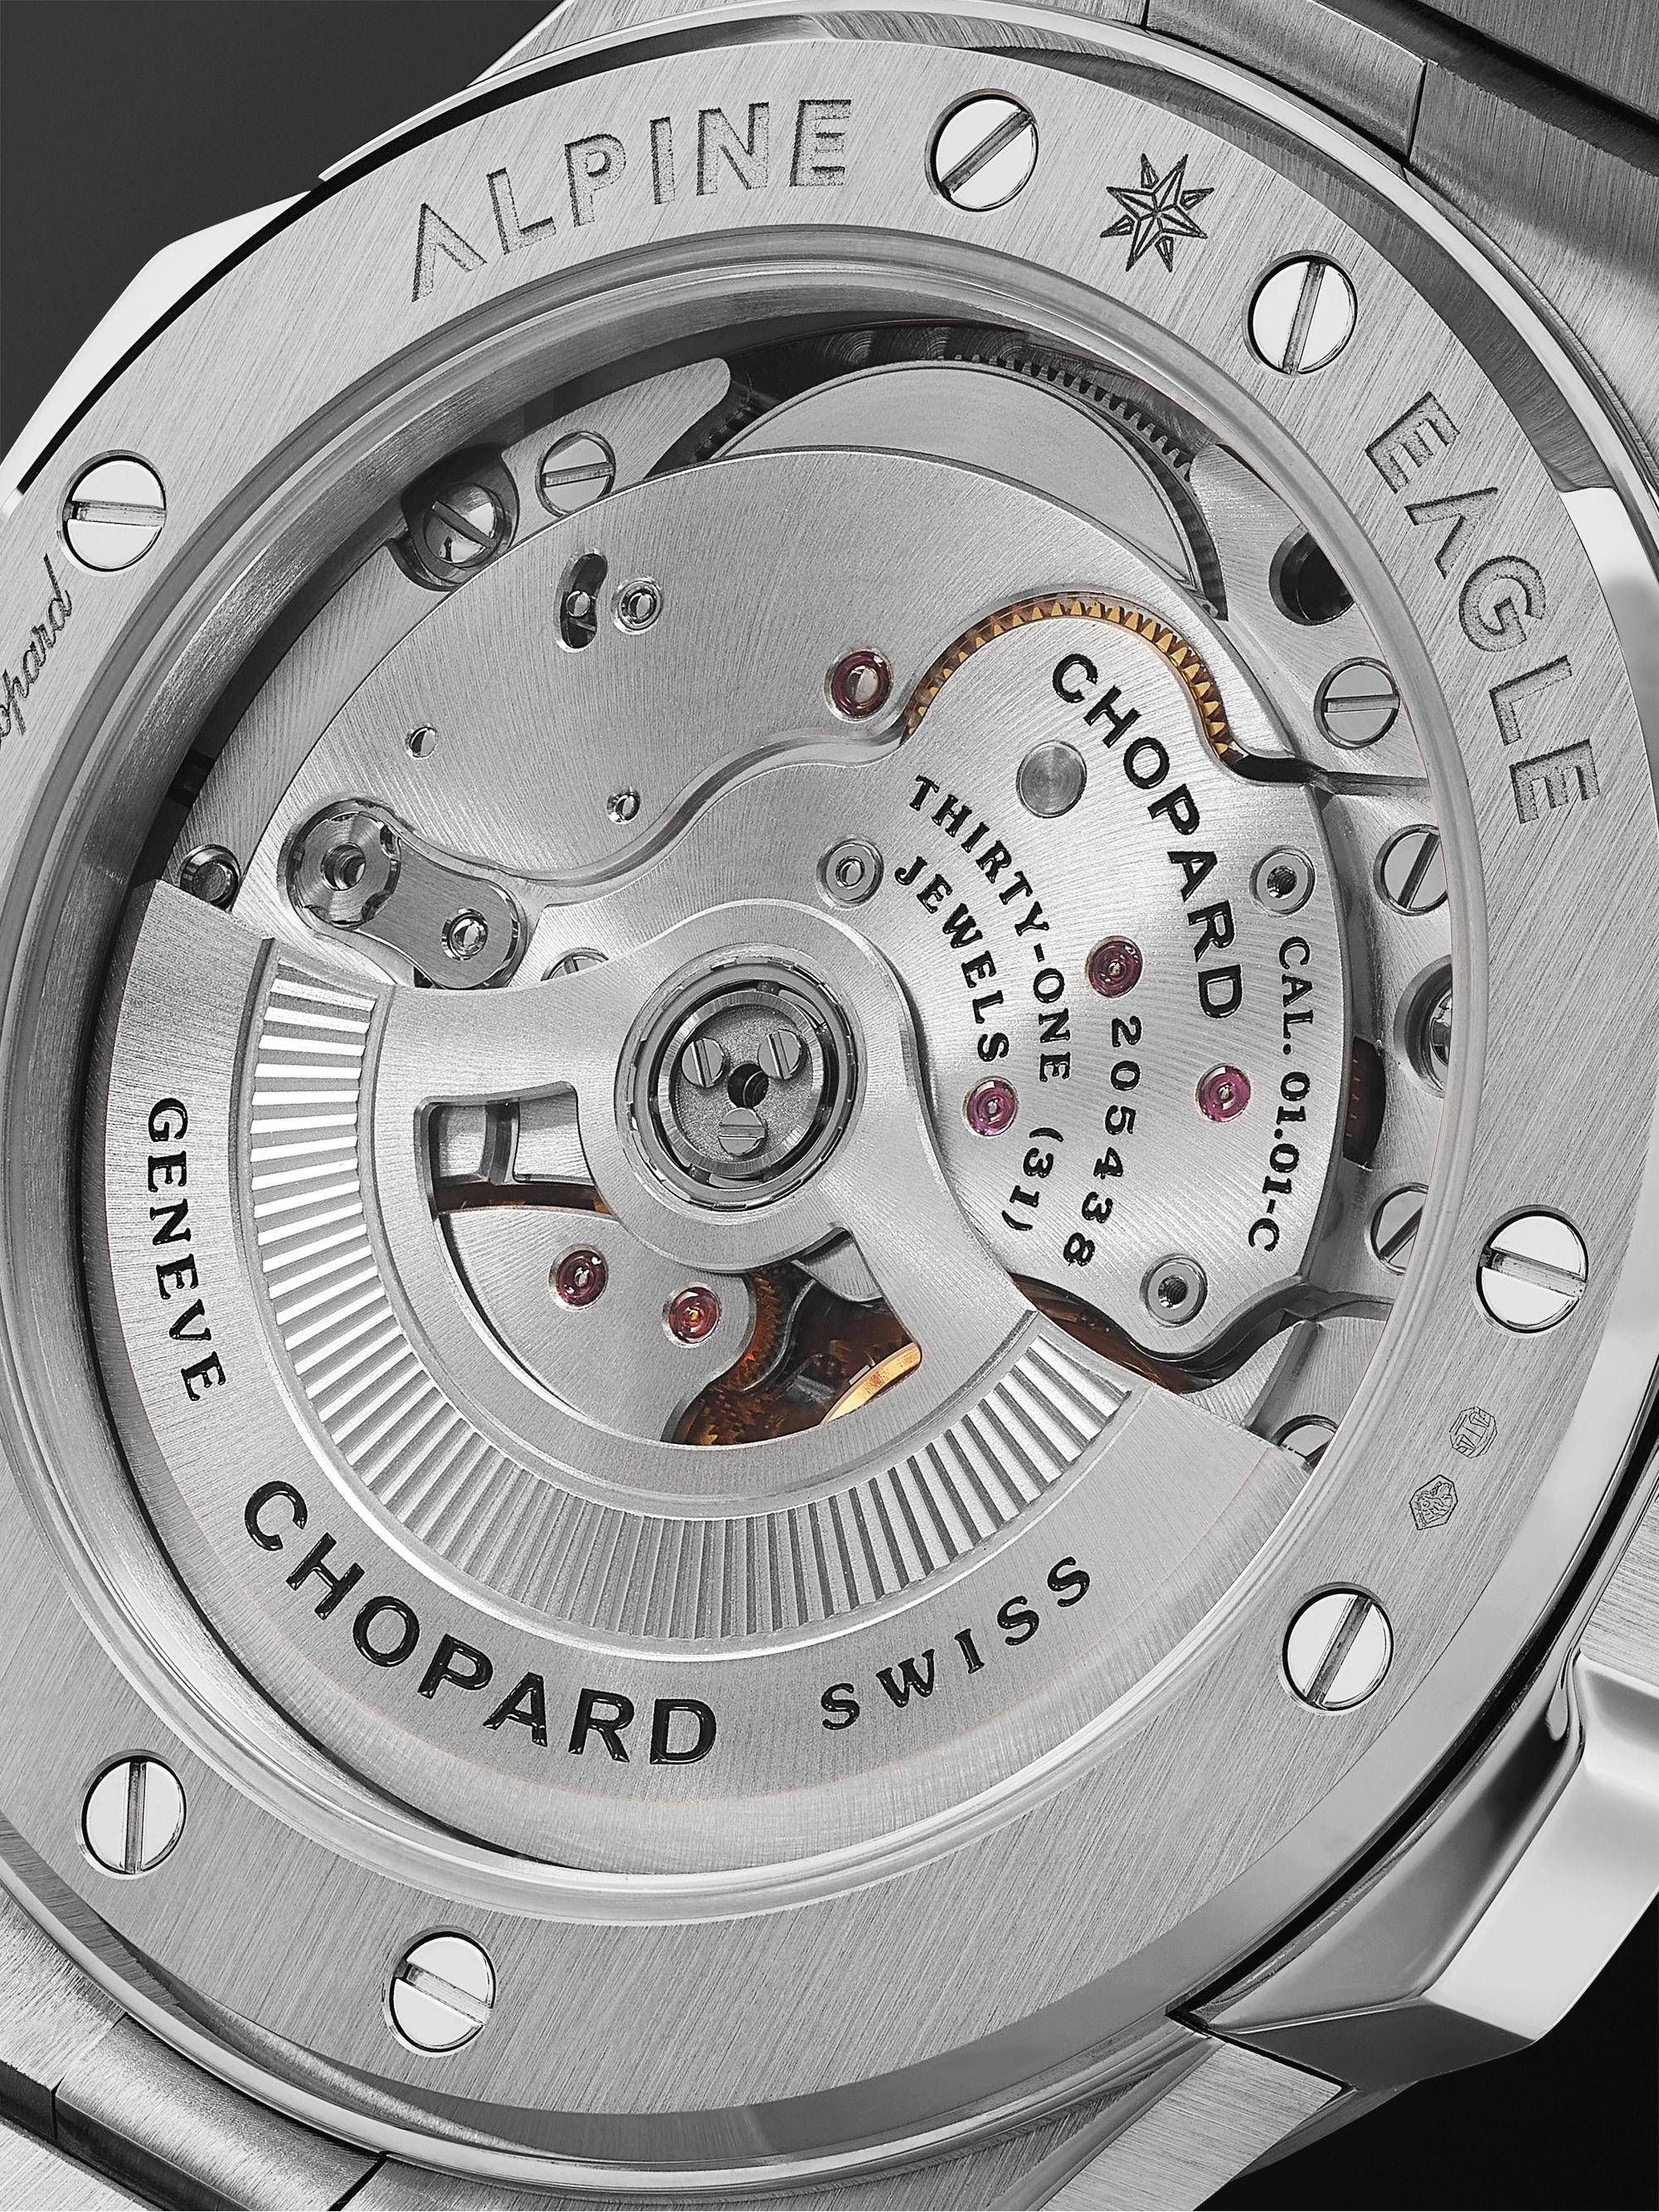 CHOPARD Alpine Eagle Large Automatic 41mm Lucent Steel Watch, Ref. No. 298600-3002